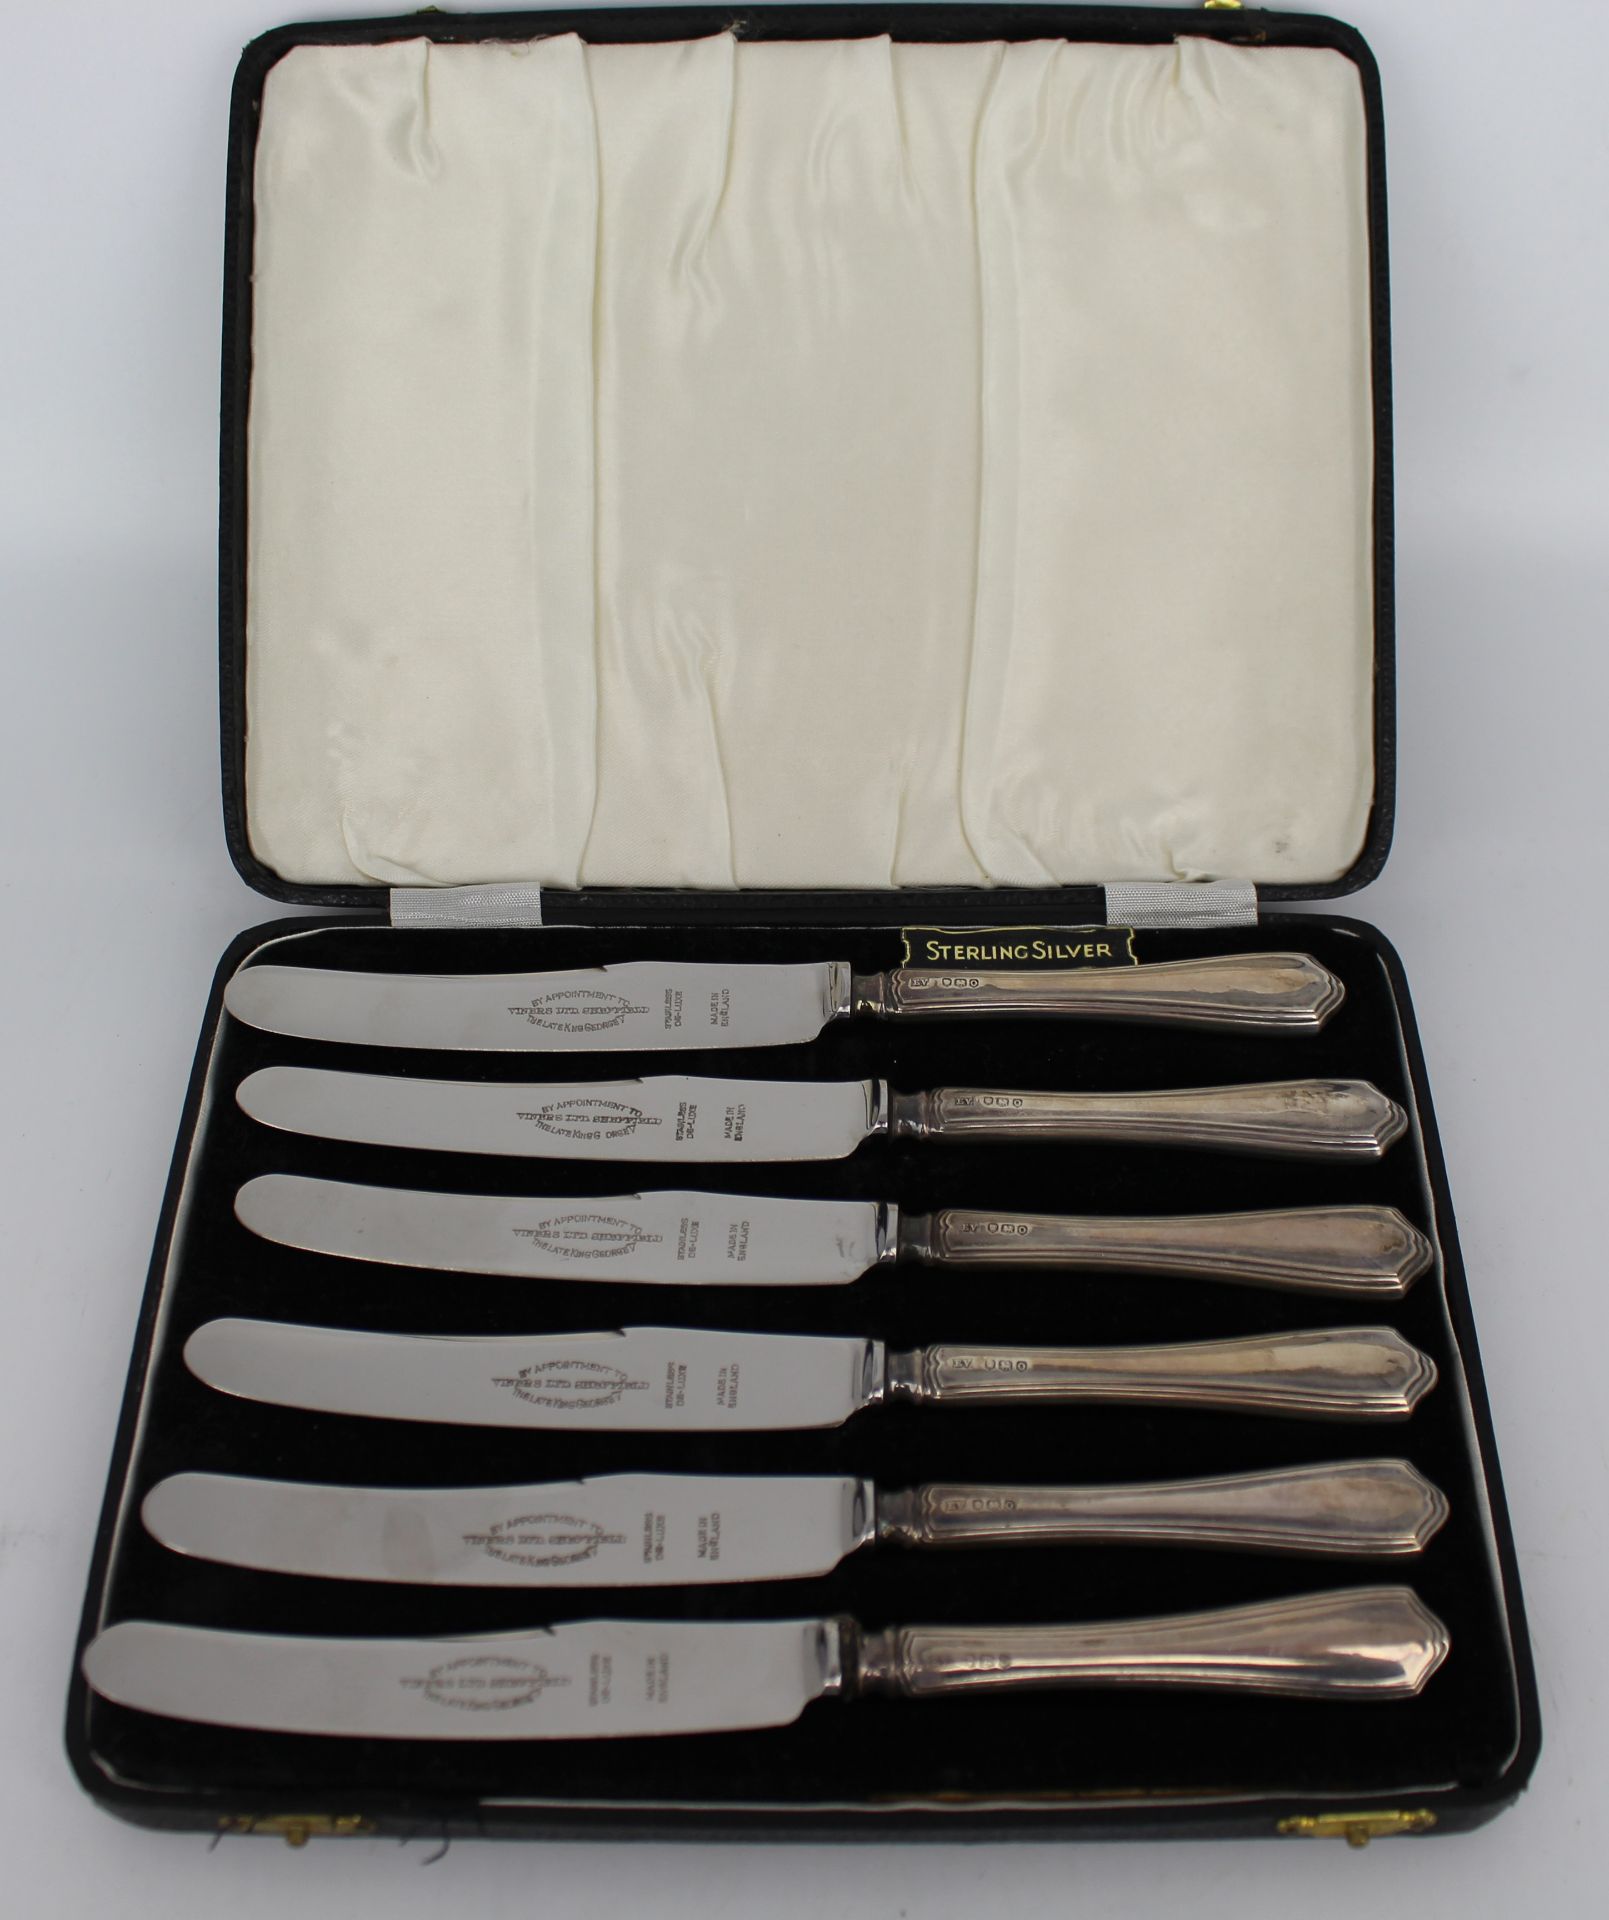 Cased Set of 6 Silver Knives - Image 3 of 3